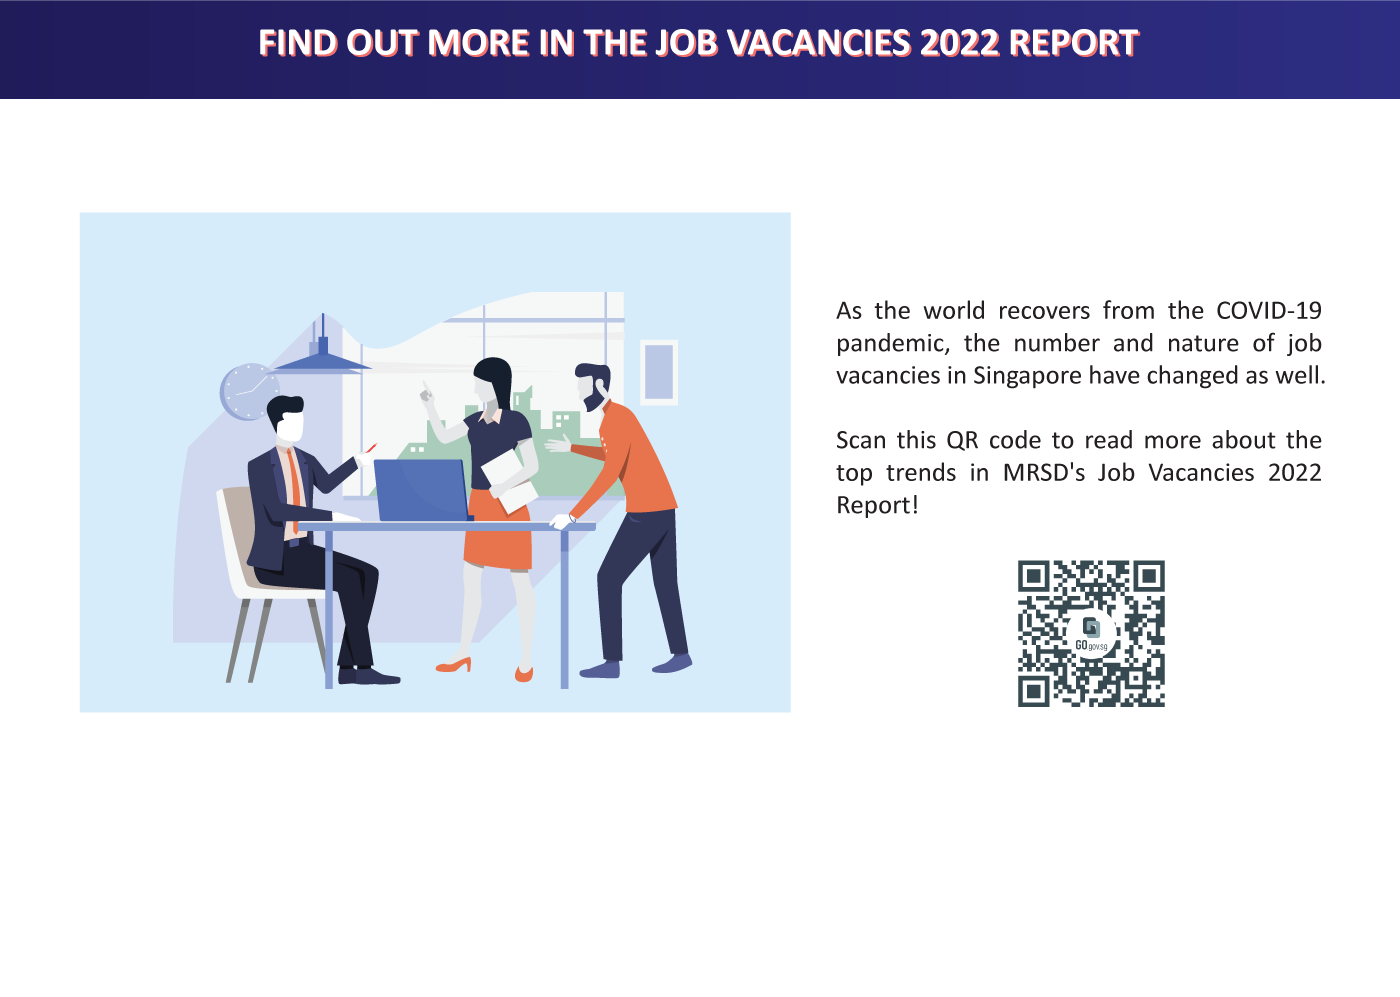 Find out more in the Job Vacancies 2022 Report